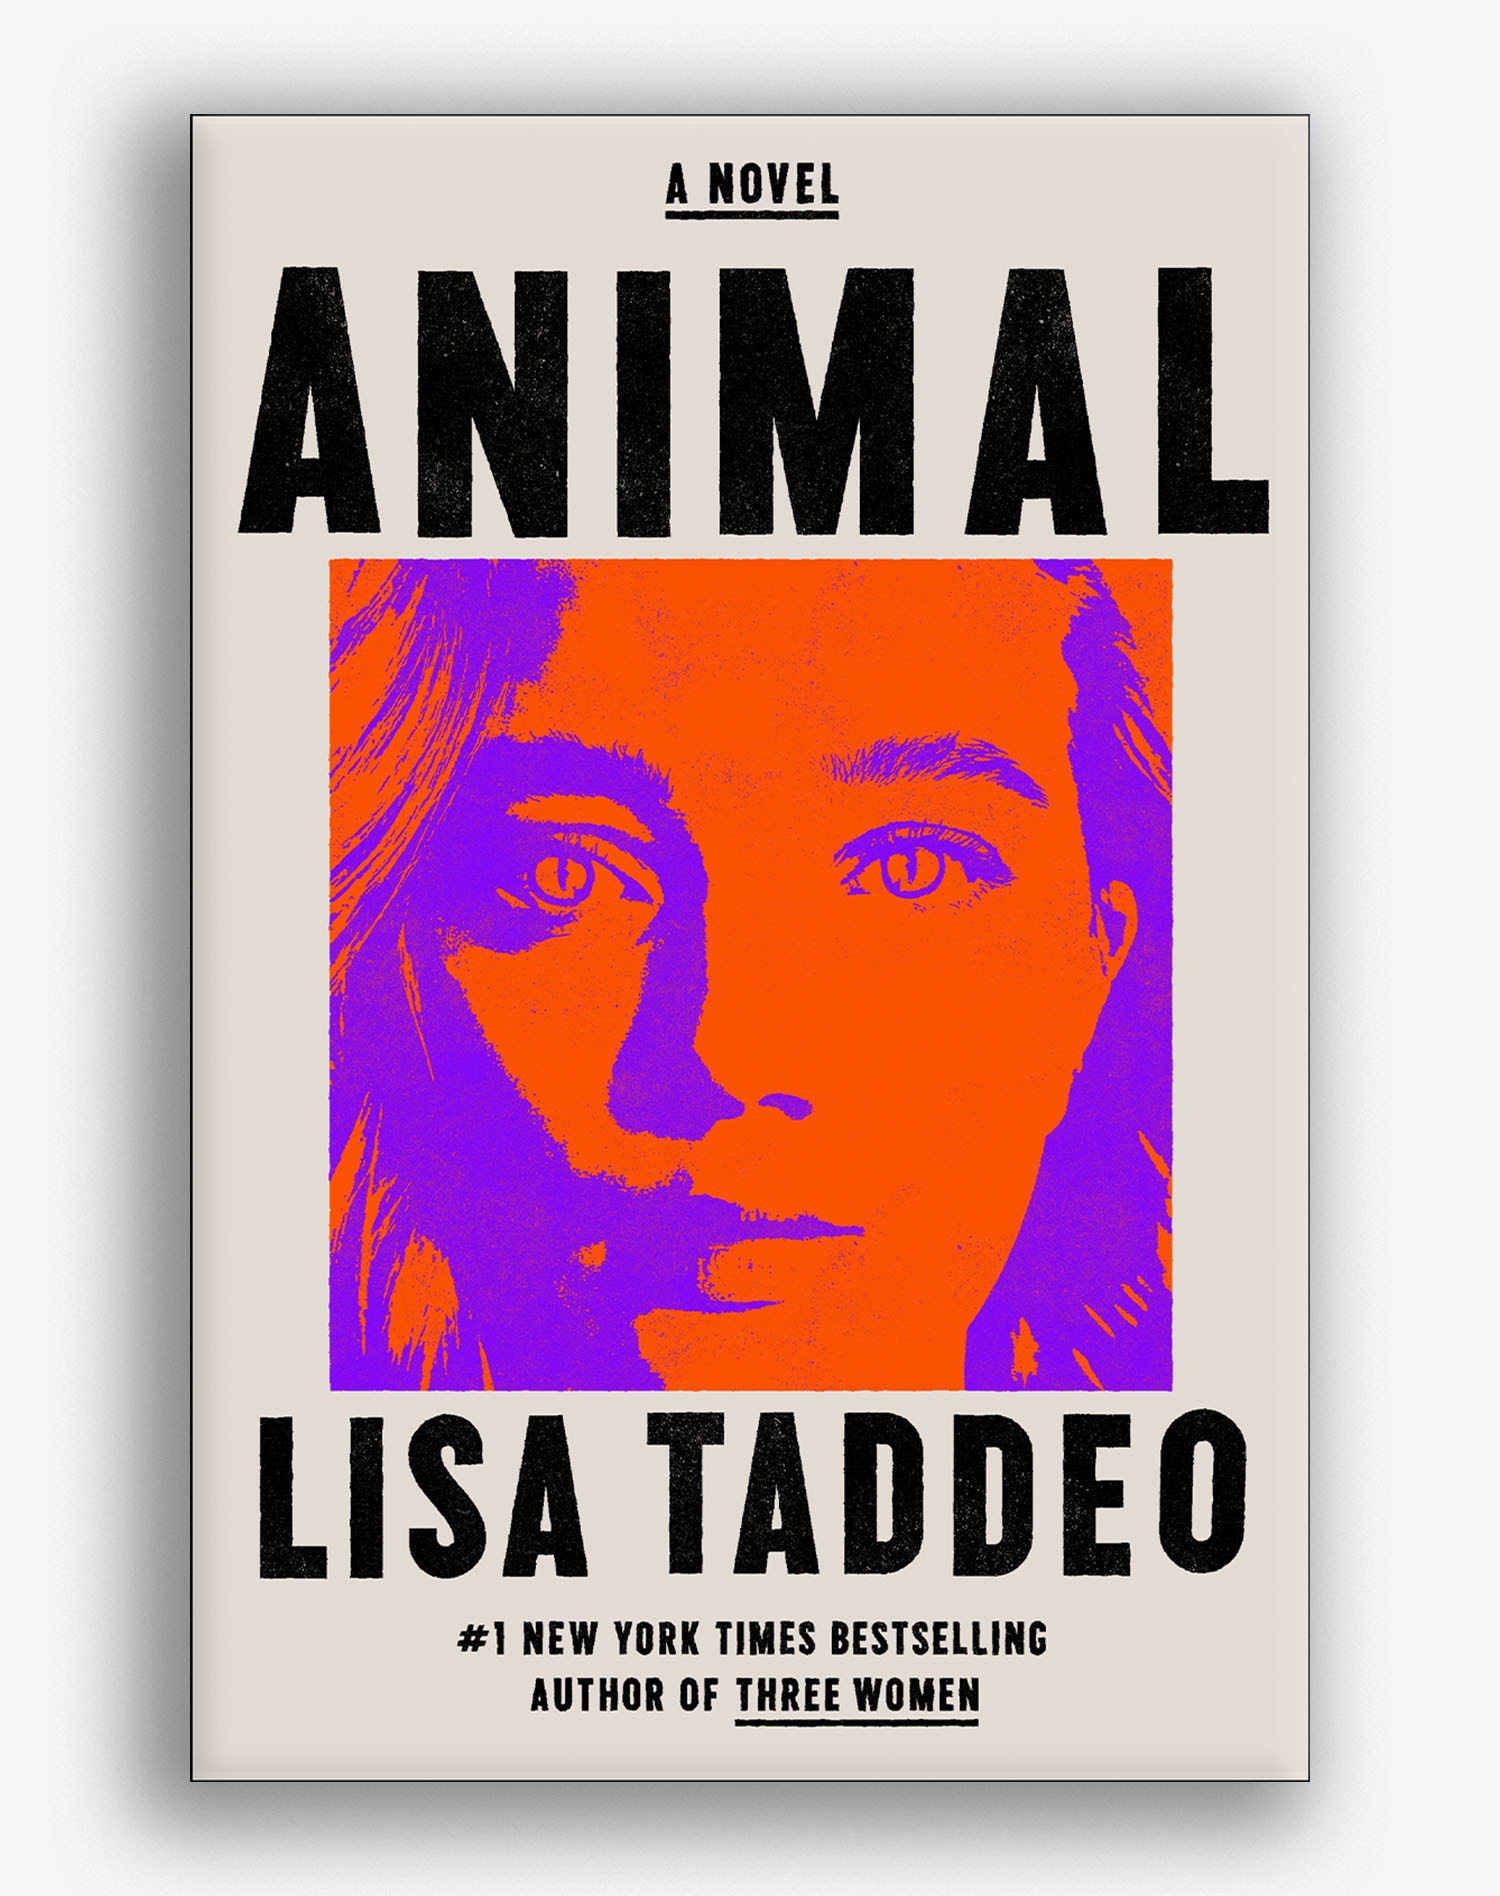 Cover of the book "Animal" by Lisa Taddeo. Features a red and blue stylized image of a woman's face and text that reads "A Novel. Animal. Lisa Taddeo. #1 New York Times Bestselling Author of Three Women"